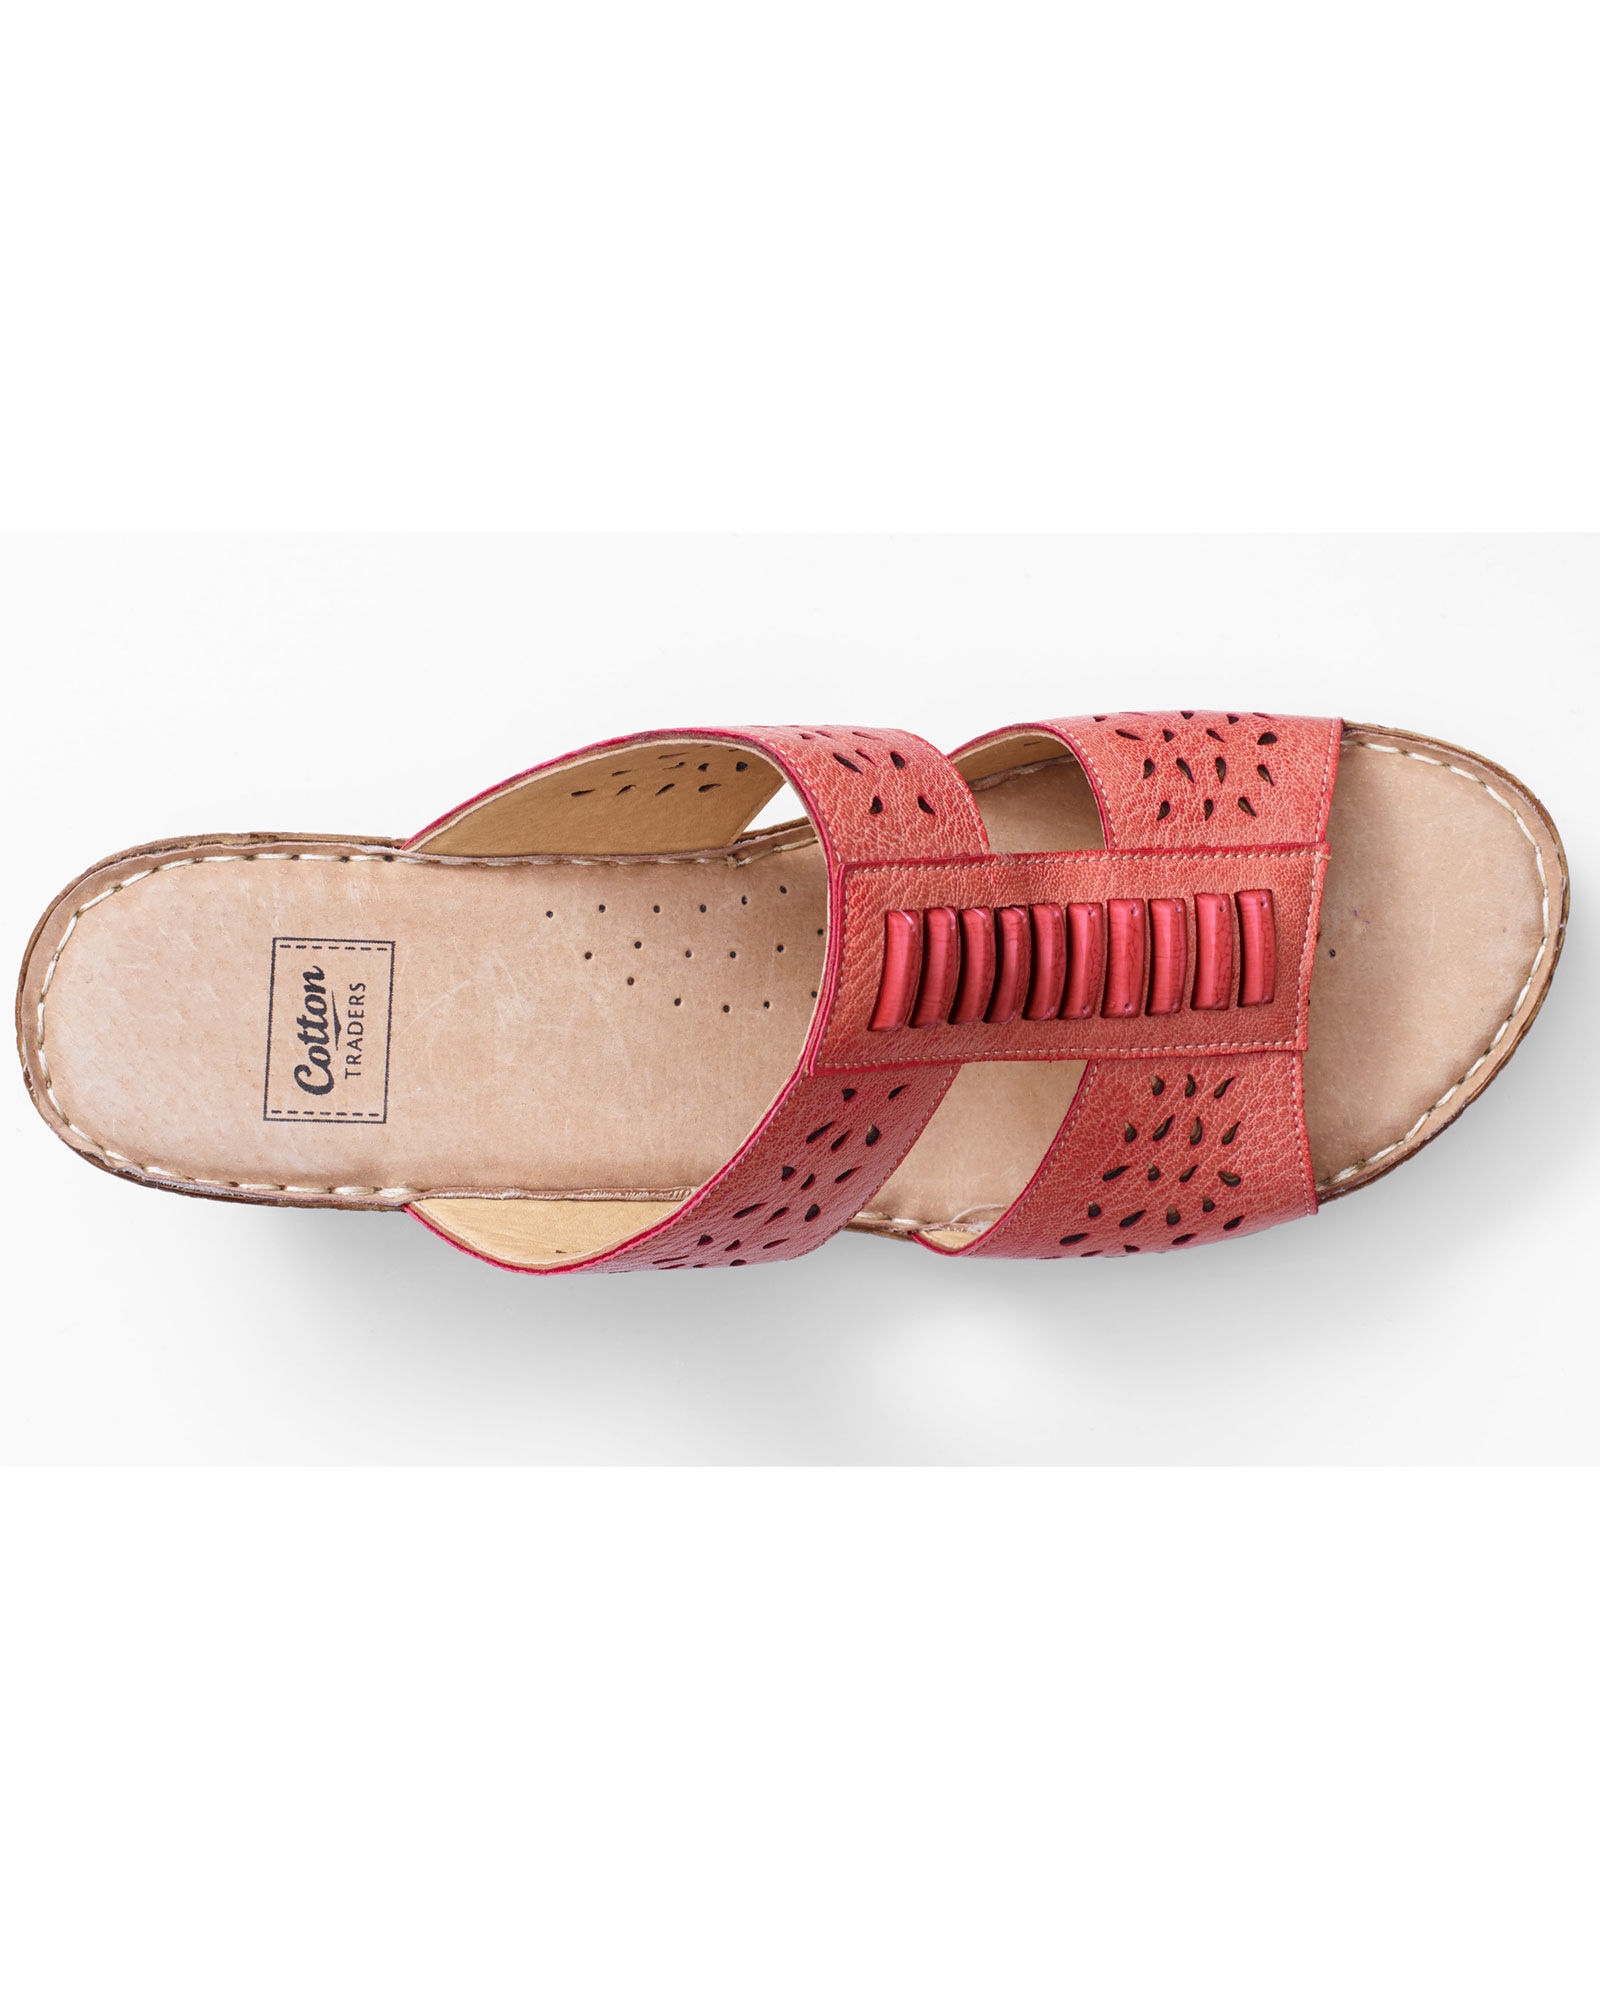 Flexi Wedge Mules at Cotton Traders